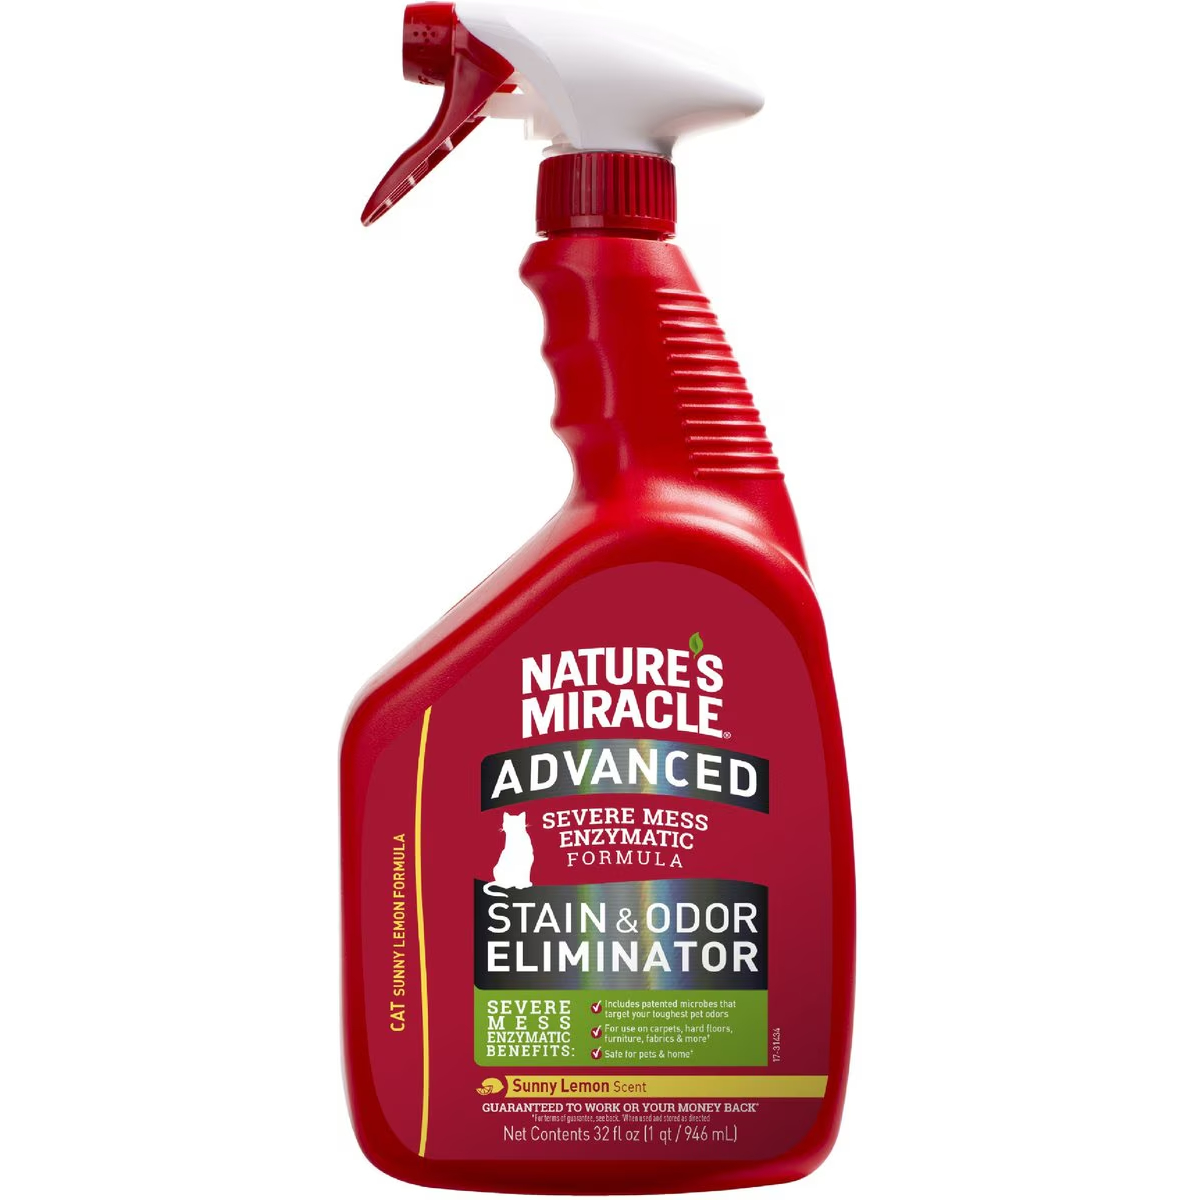 Nature's Miracle Advanced Cat Enzymatic Stain Remover & Odor Eliminator Spray